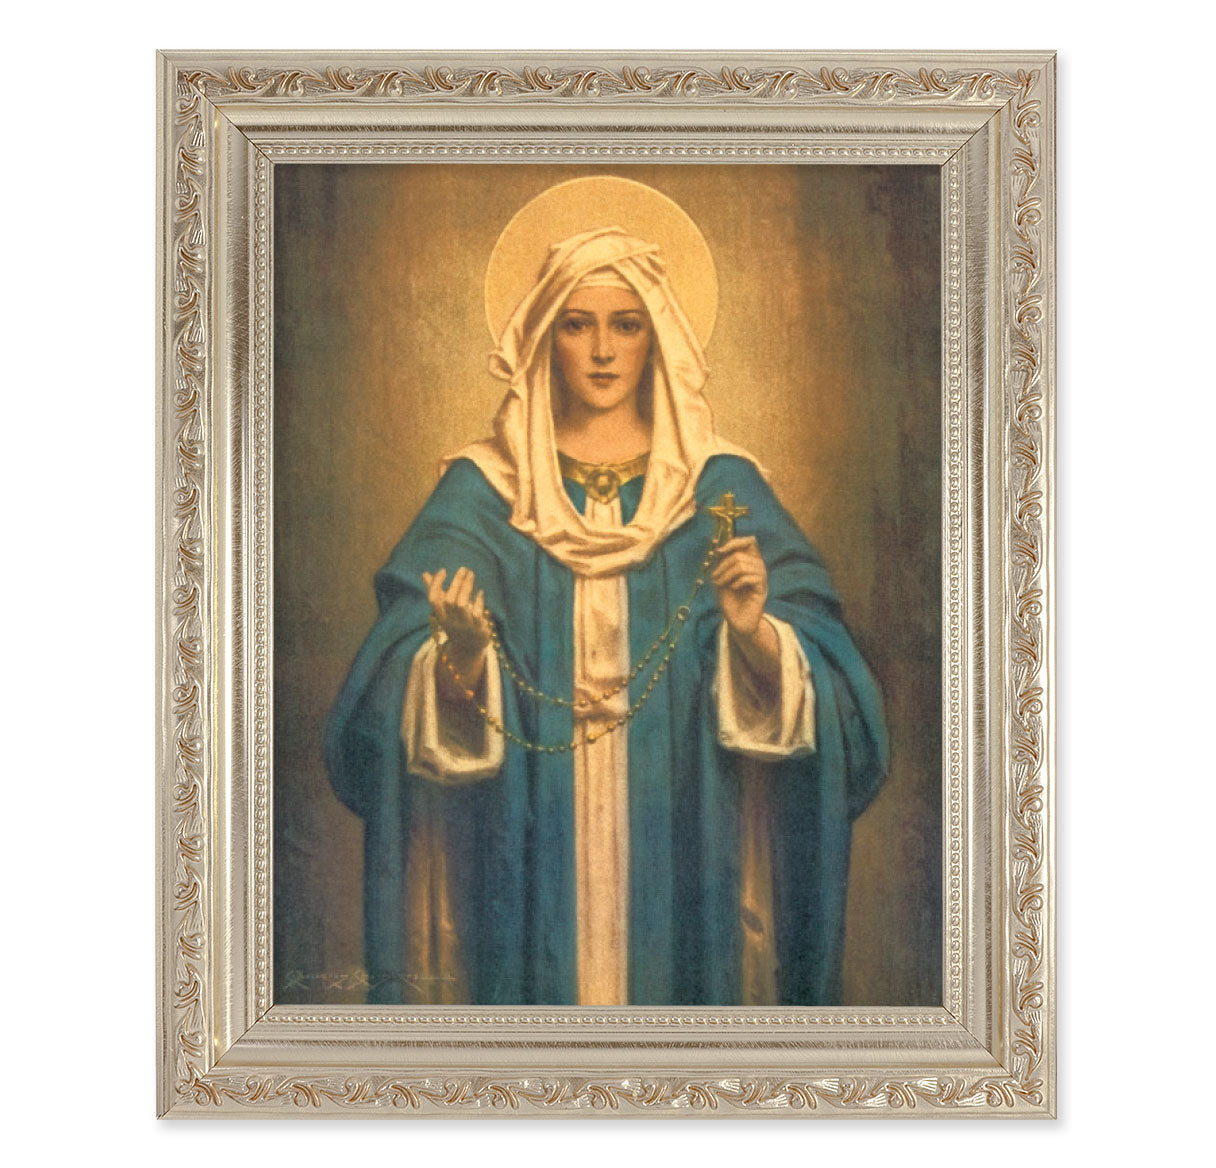 Our Lady of the Rosary Antique Silver Framed Art